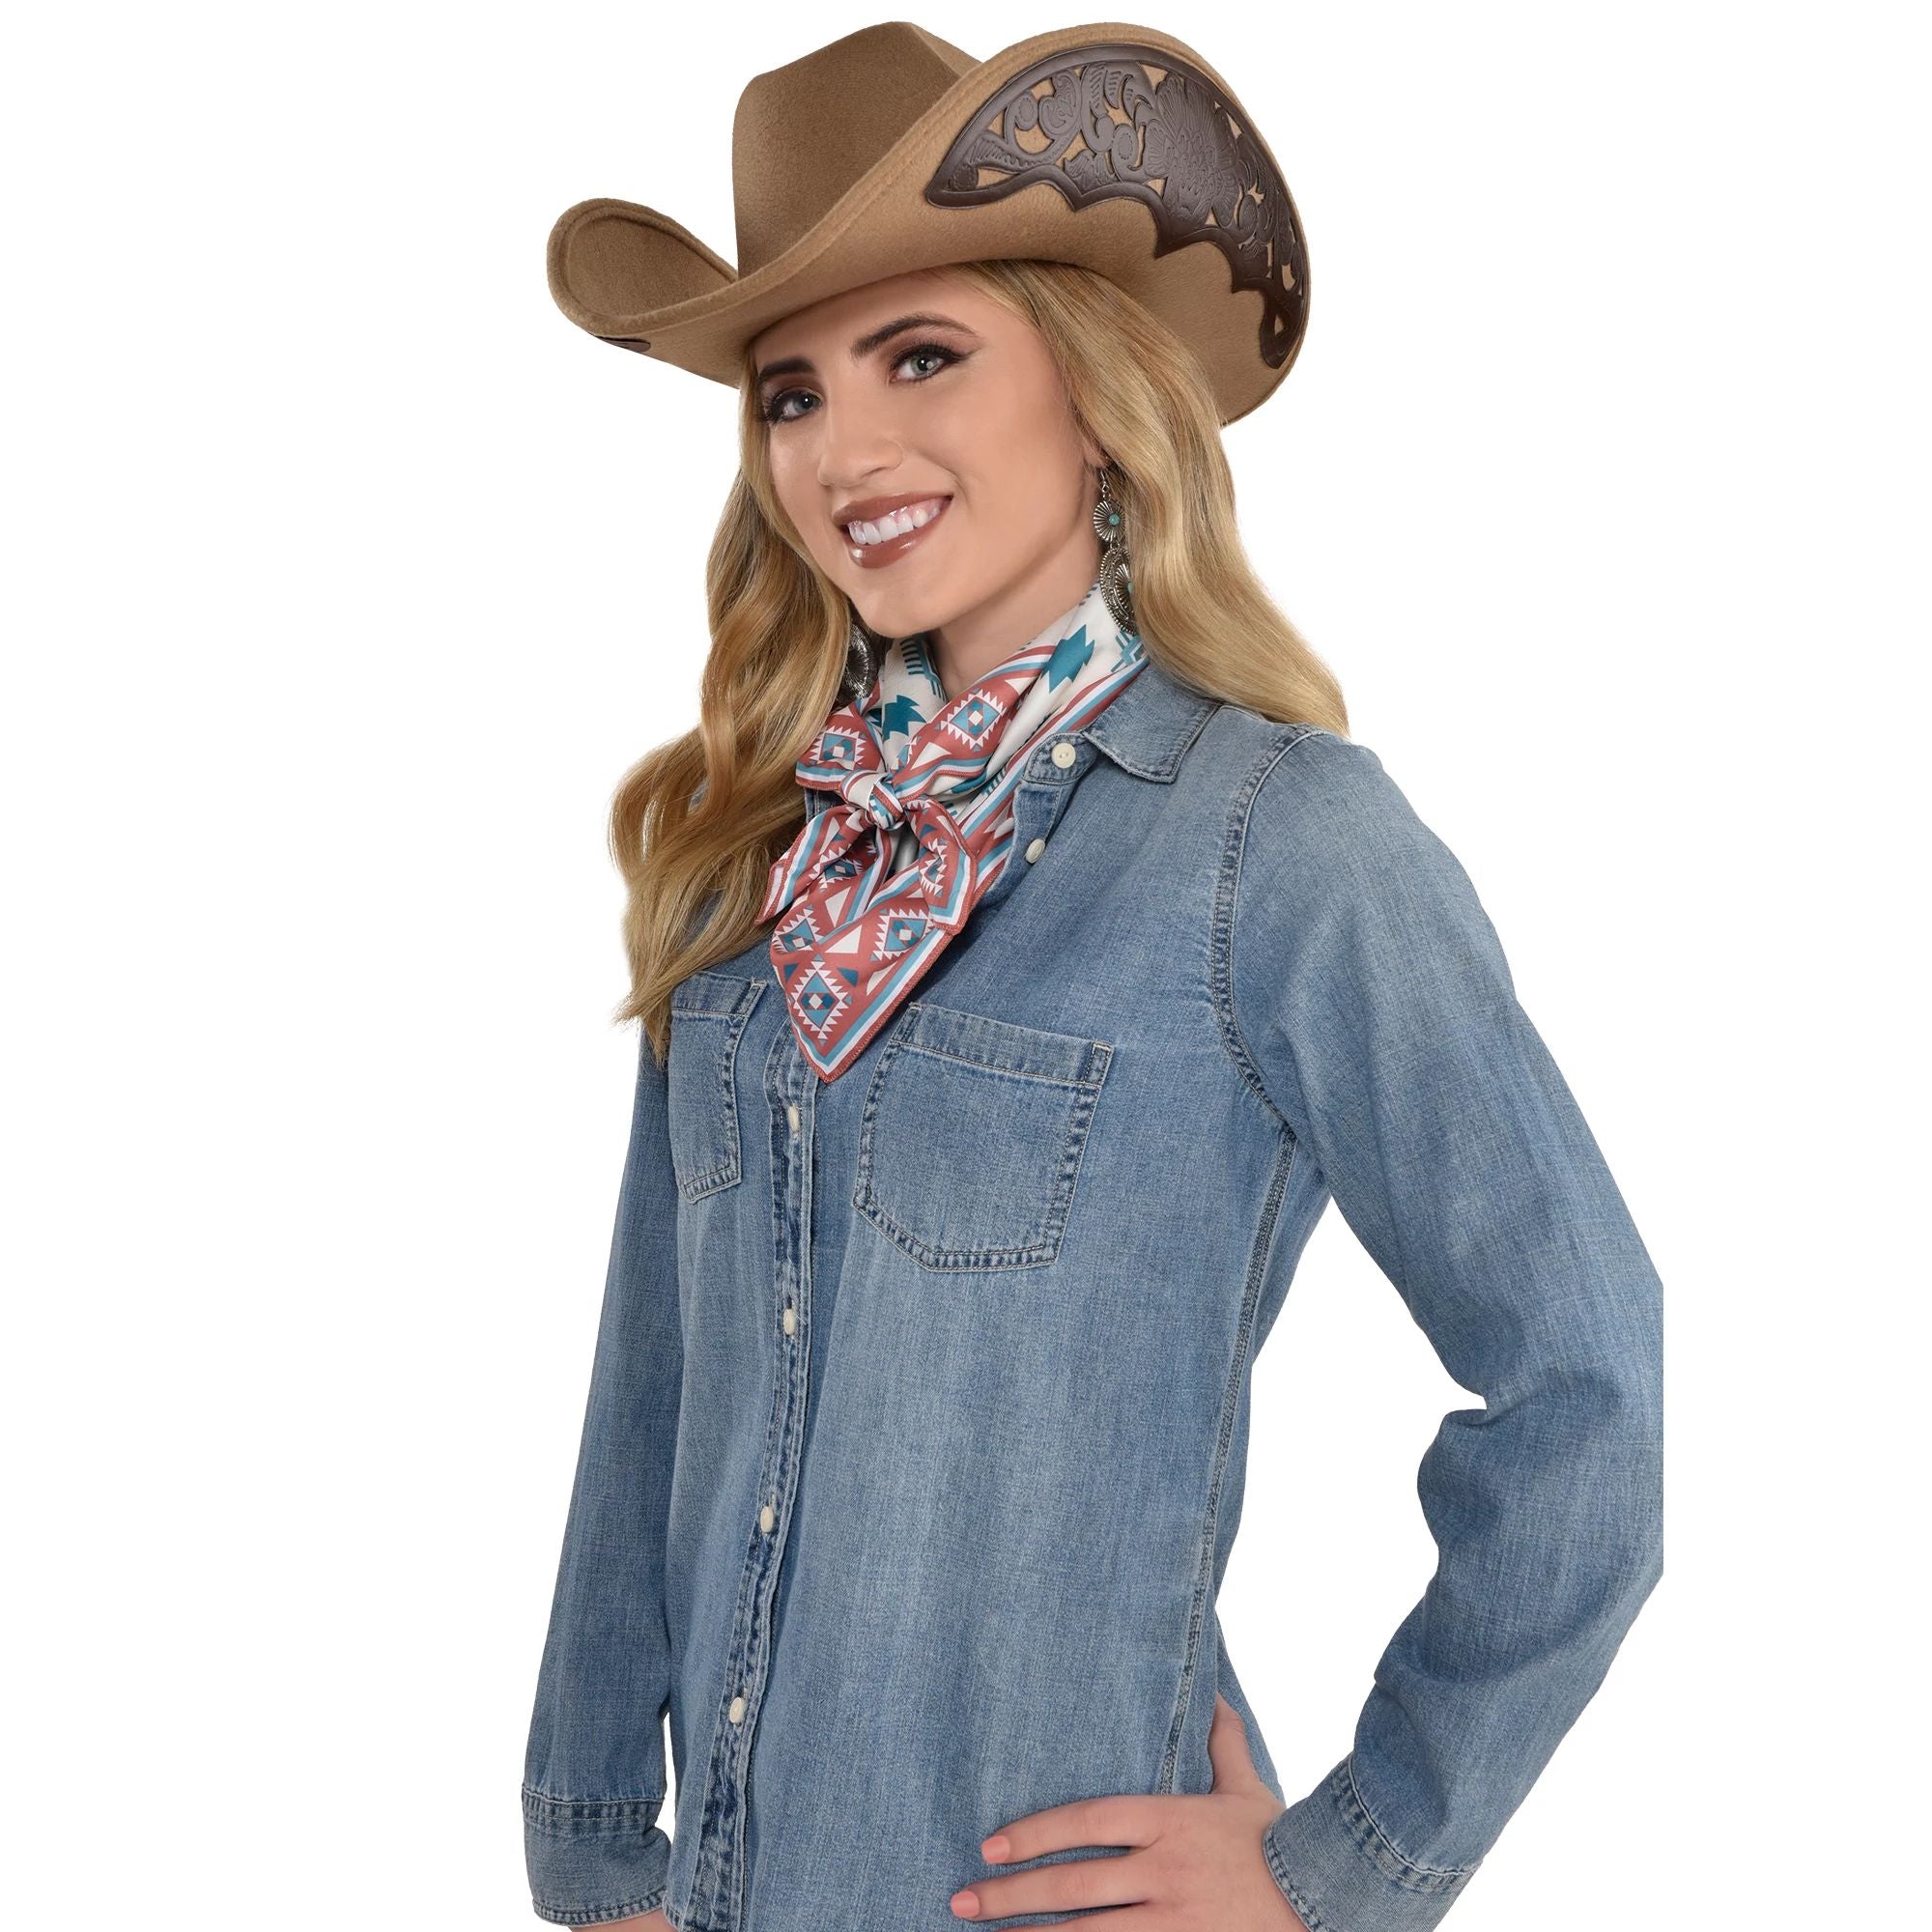 Amscan COSTUMES: HATS Oversized Cowgirl Hat